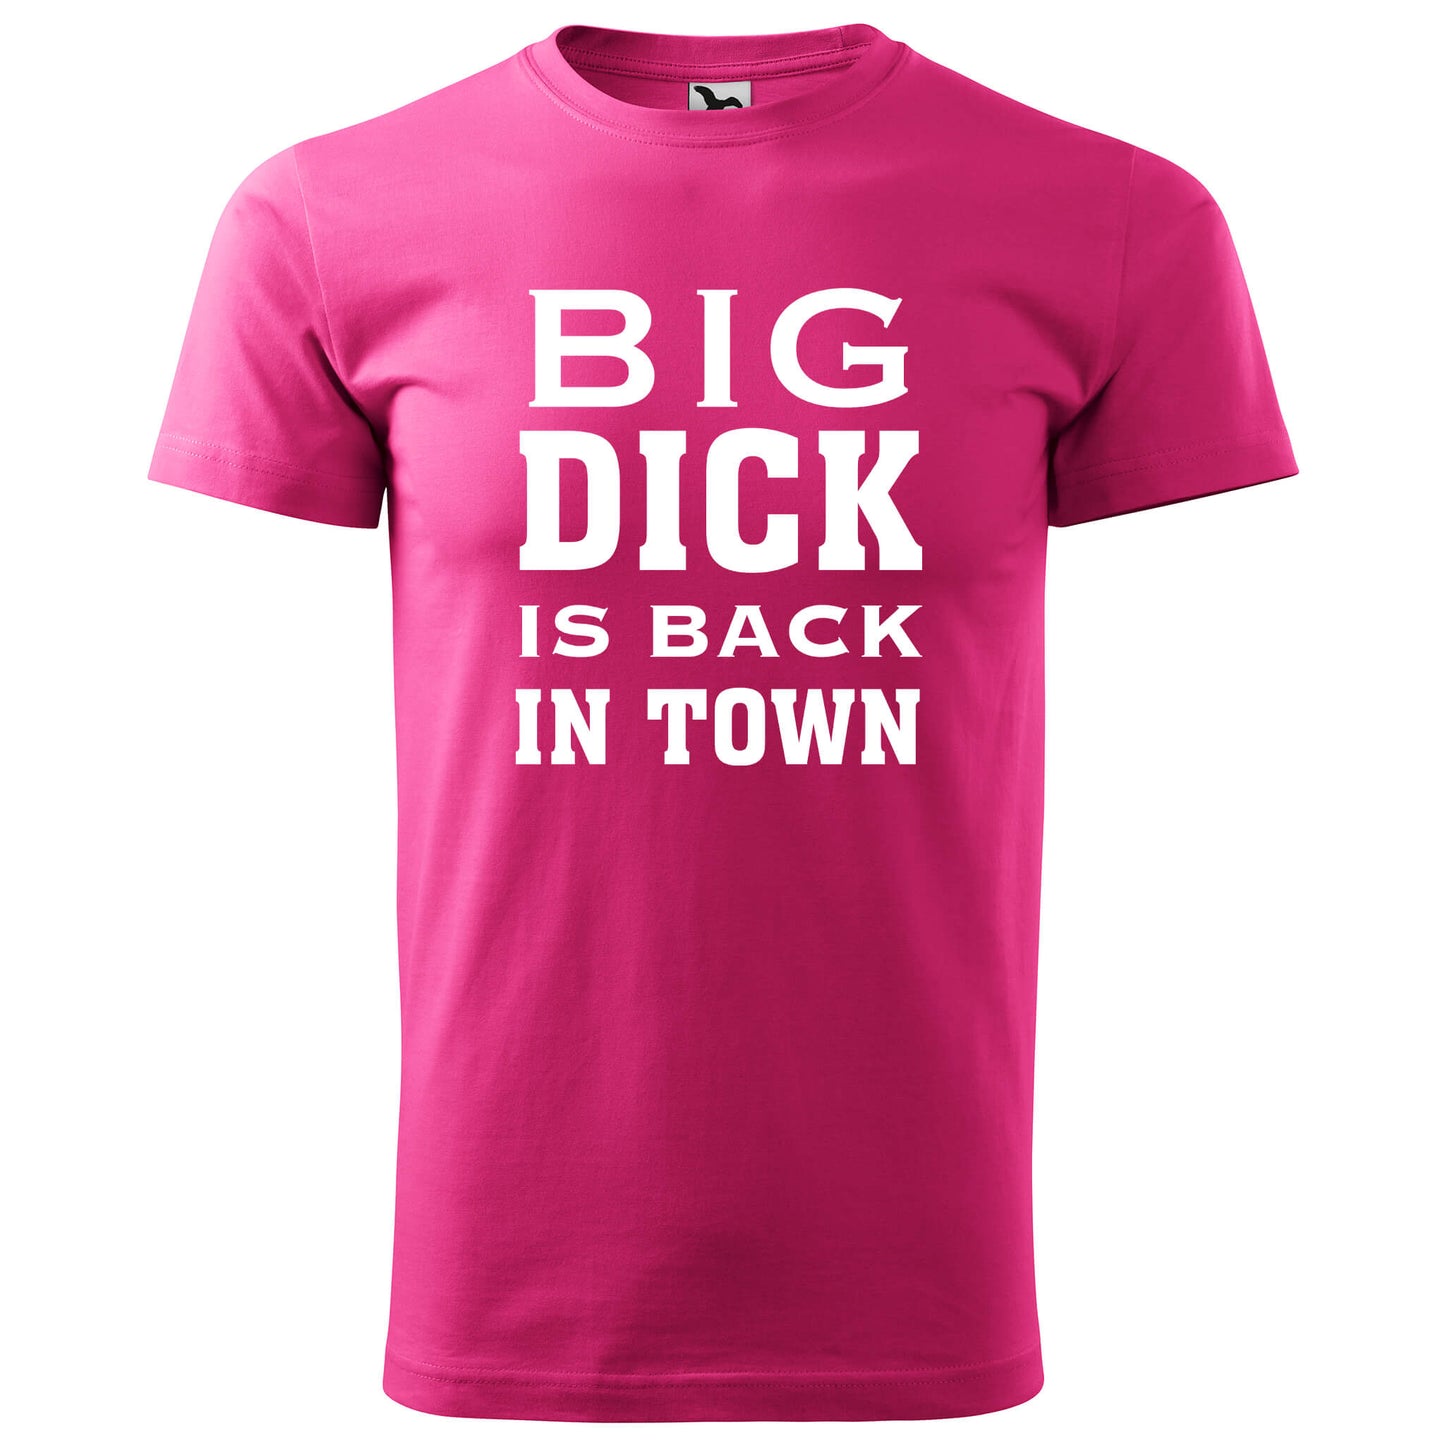 T-shirt - Big dick is back in town